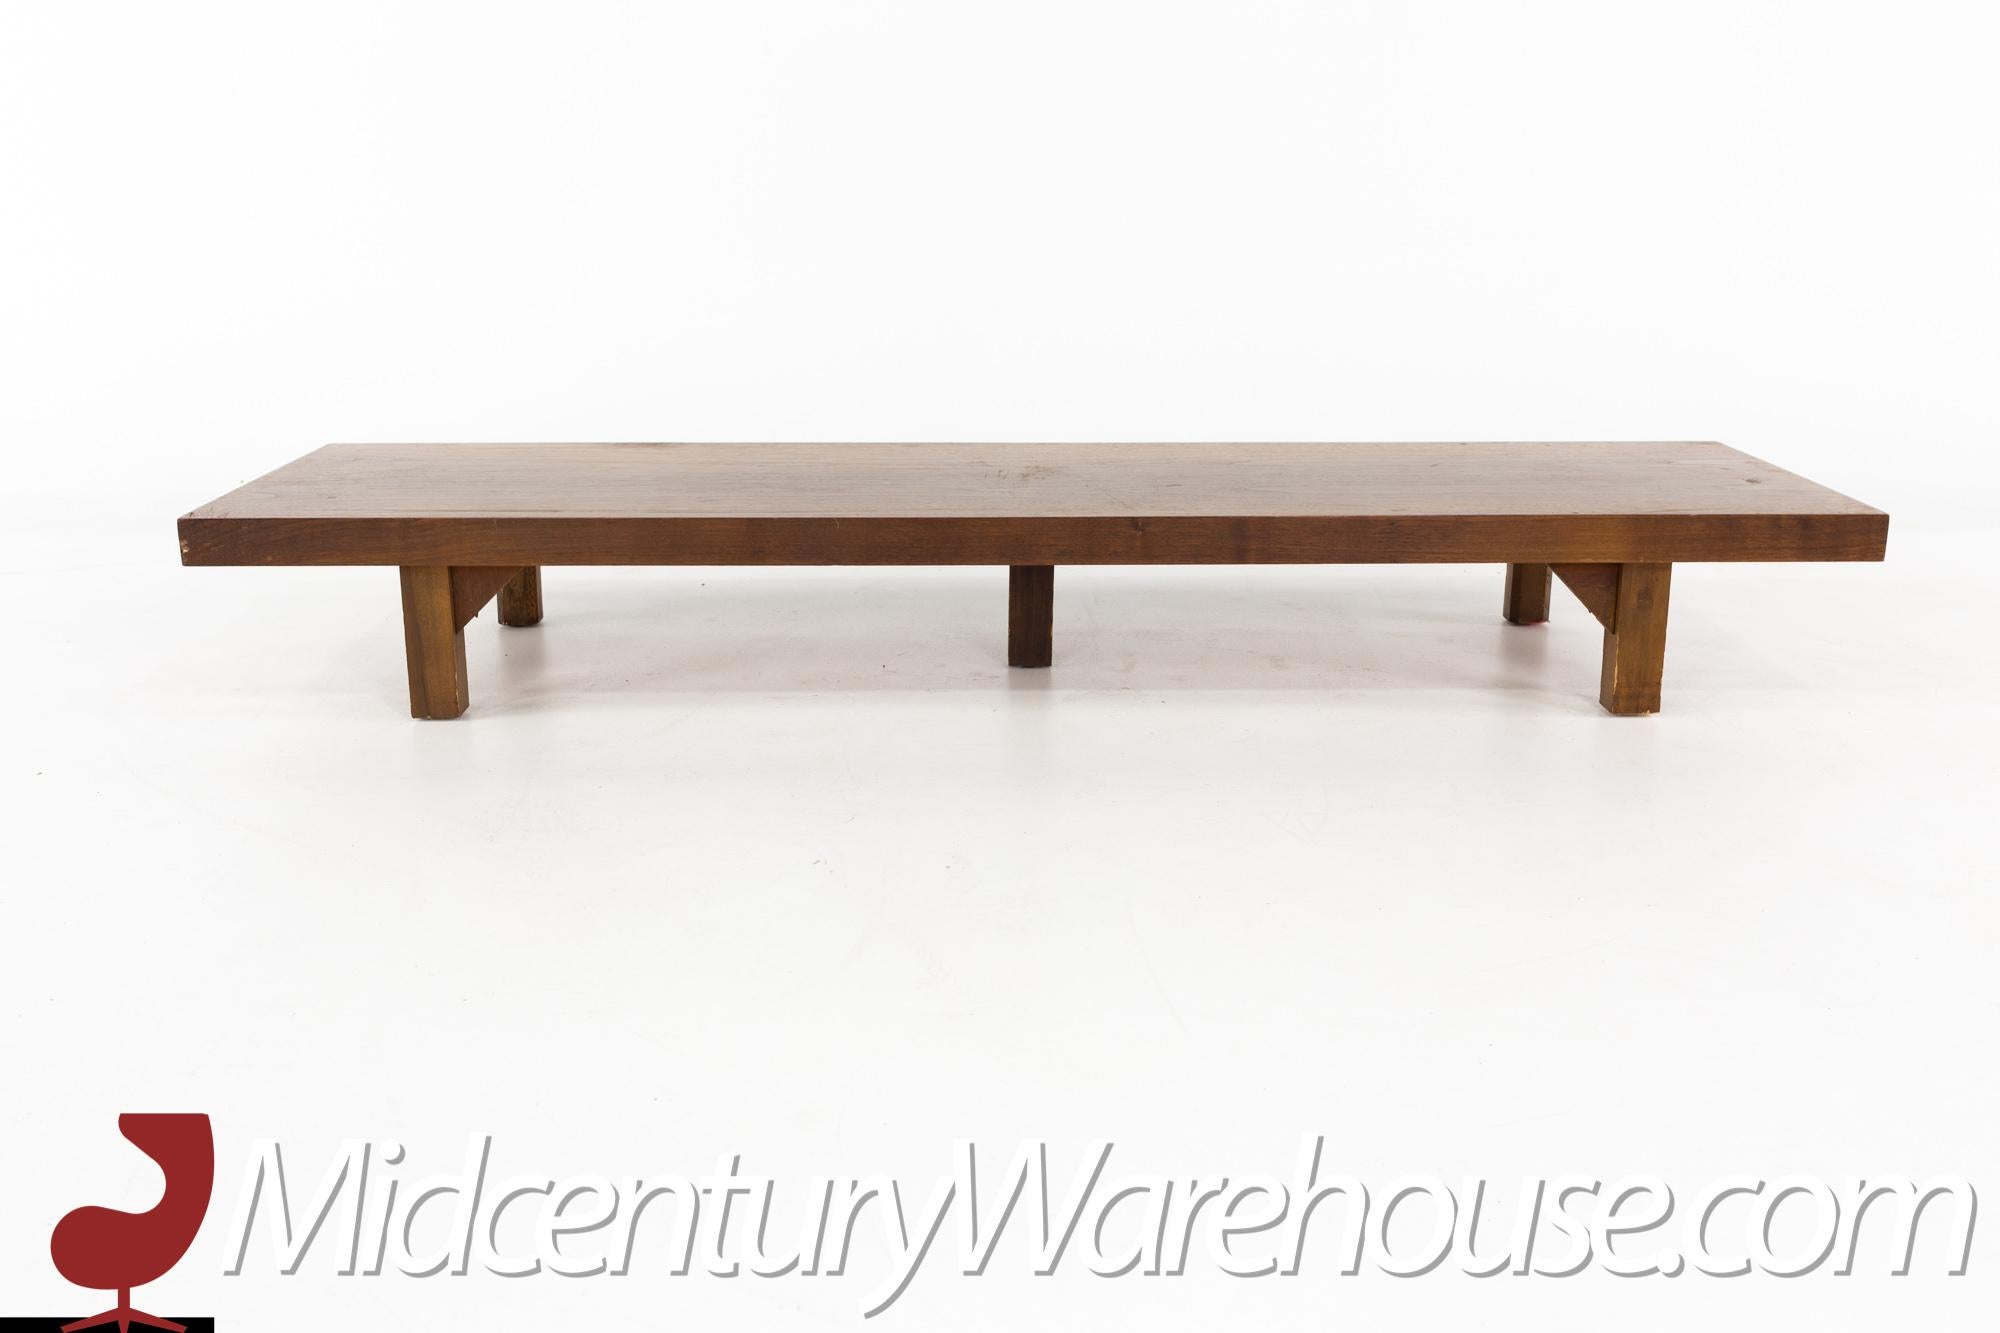 Merton Gershun For American of Martinsville style mid century walnut coffee table bench

This bench measures: 61.5 wide x 17.5 deep x 8 inches high

All pieces of furniture can be had in what we call restored vintage condition. That means the